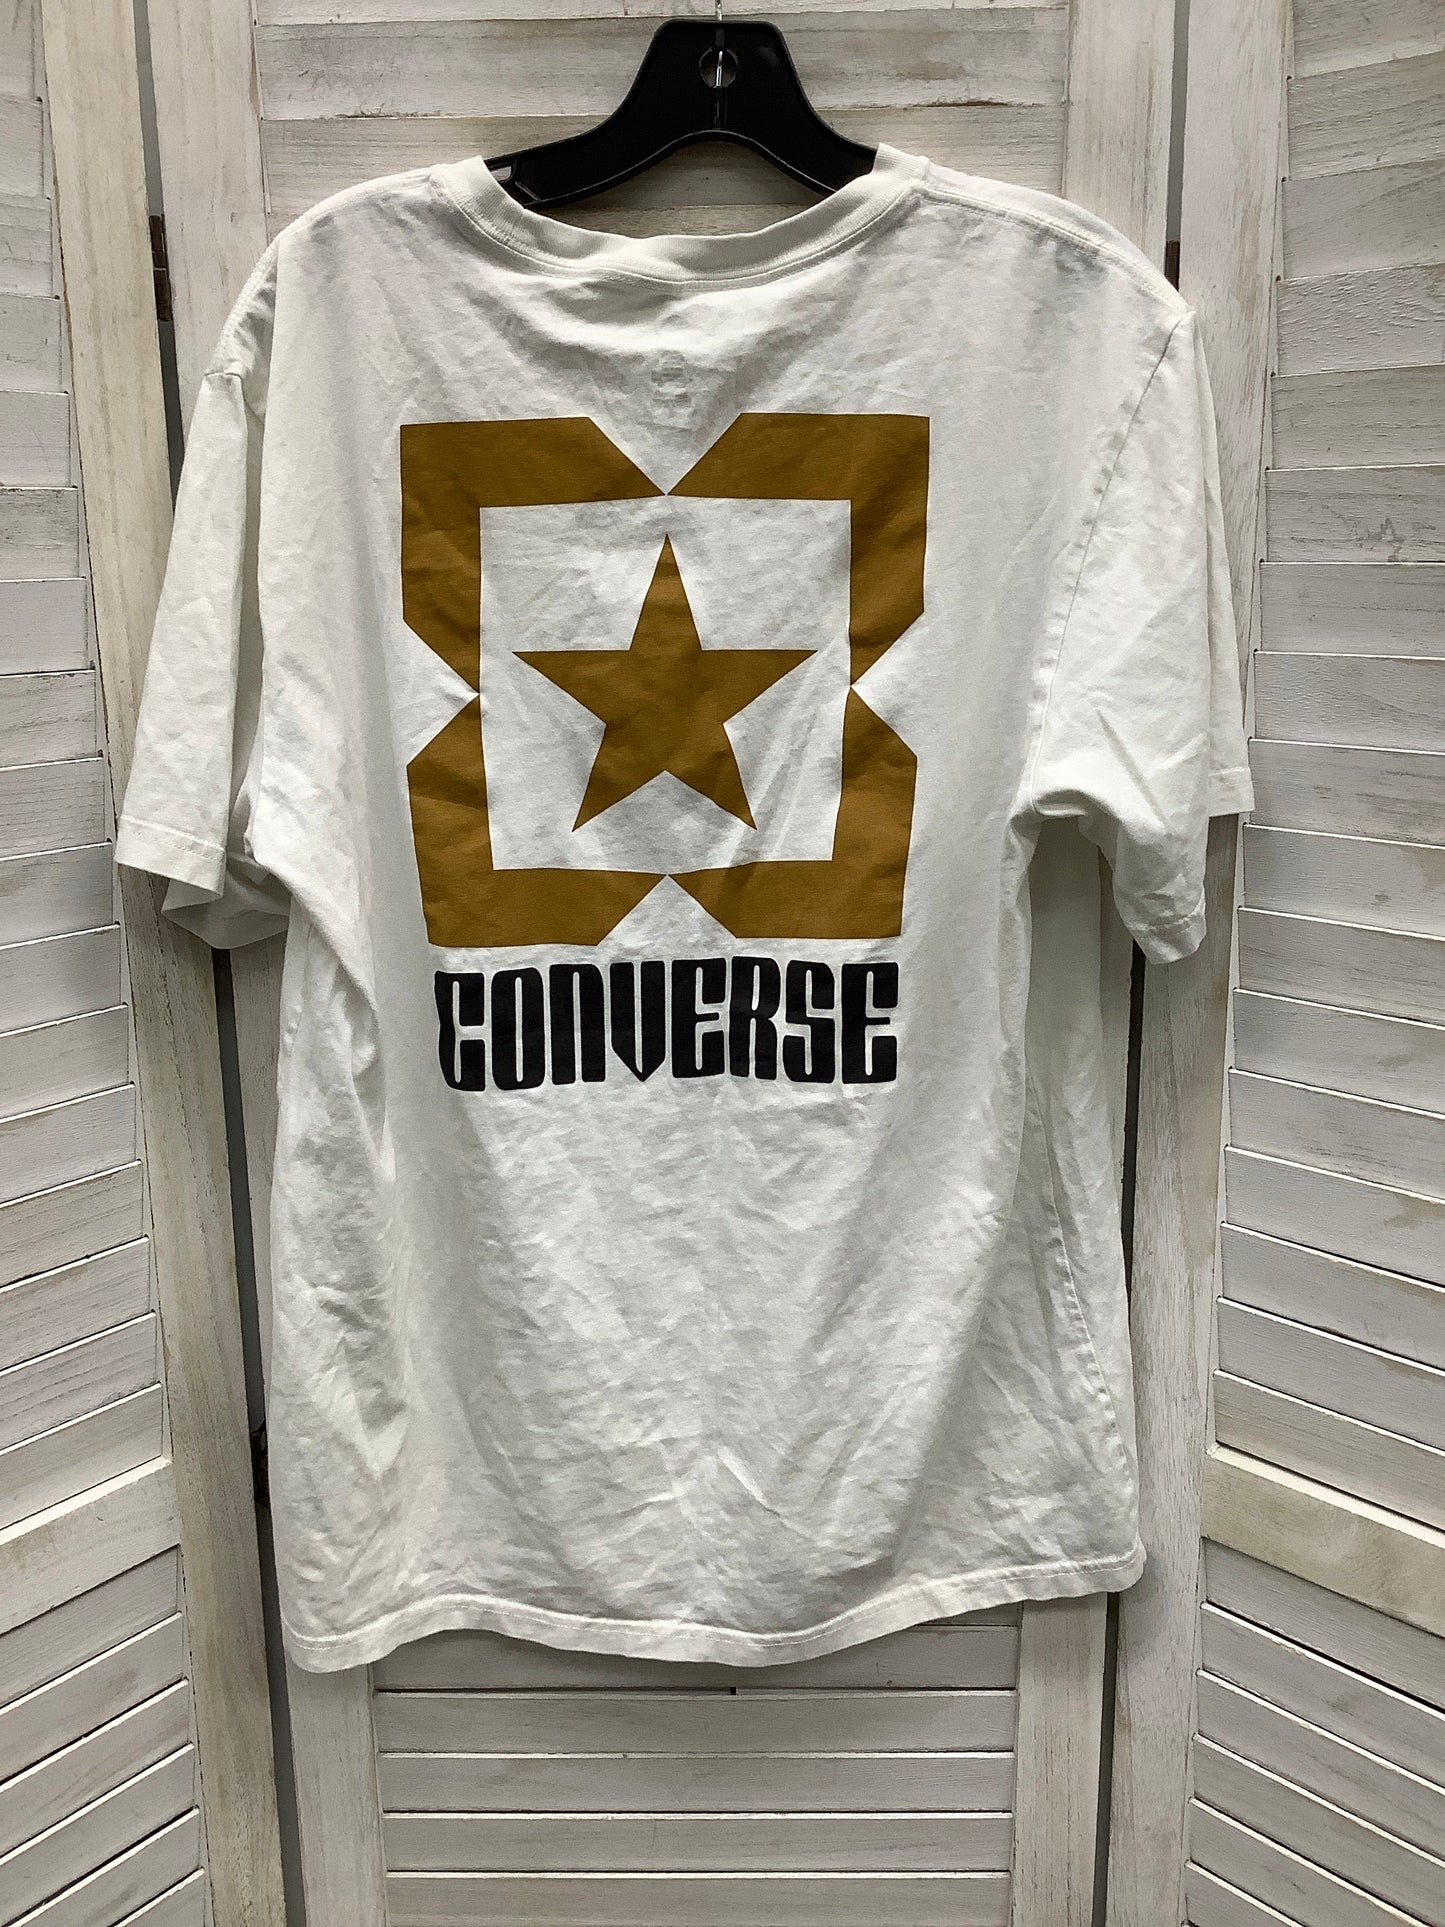 Top Short Sleeve Basic By Converse  Size: Xl